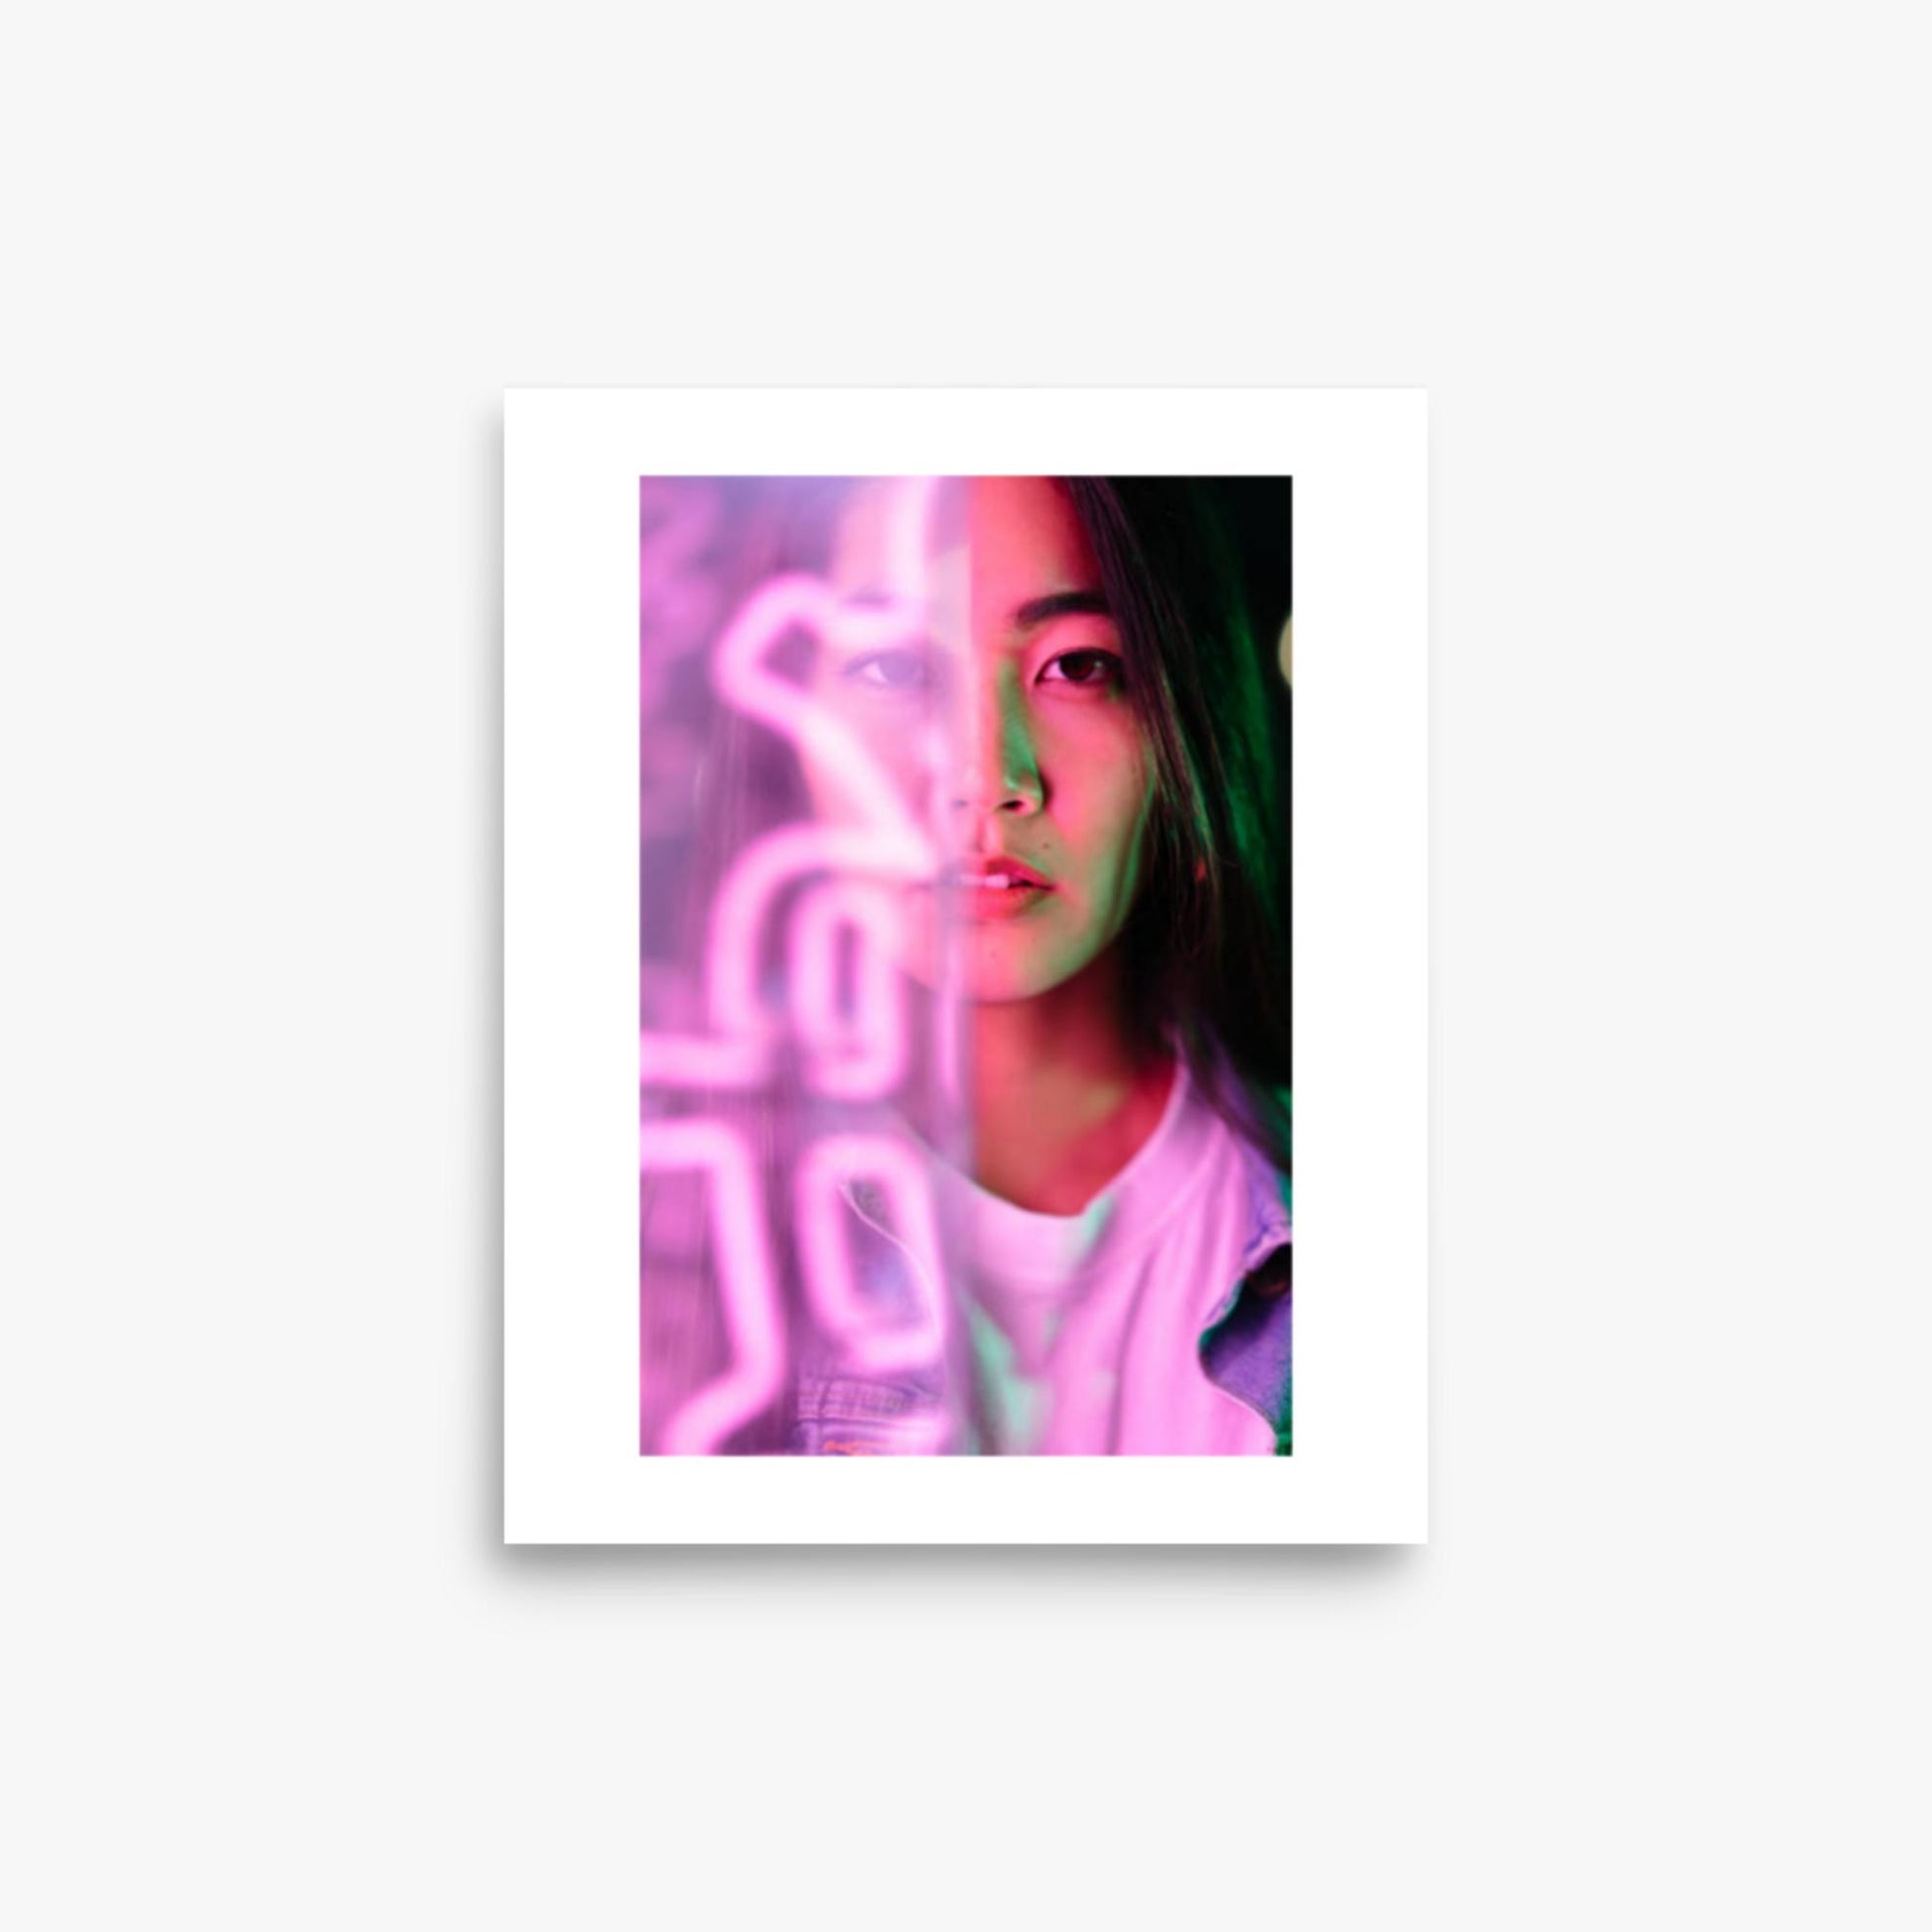 Portrait of young woman lit by pink neon light 8x10 in Poster